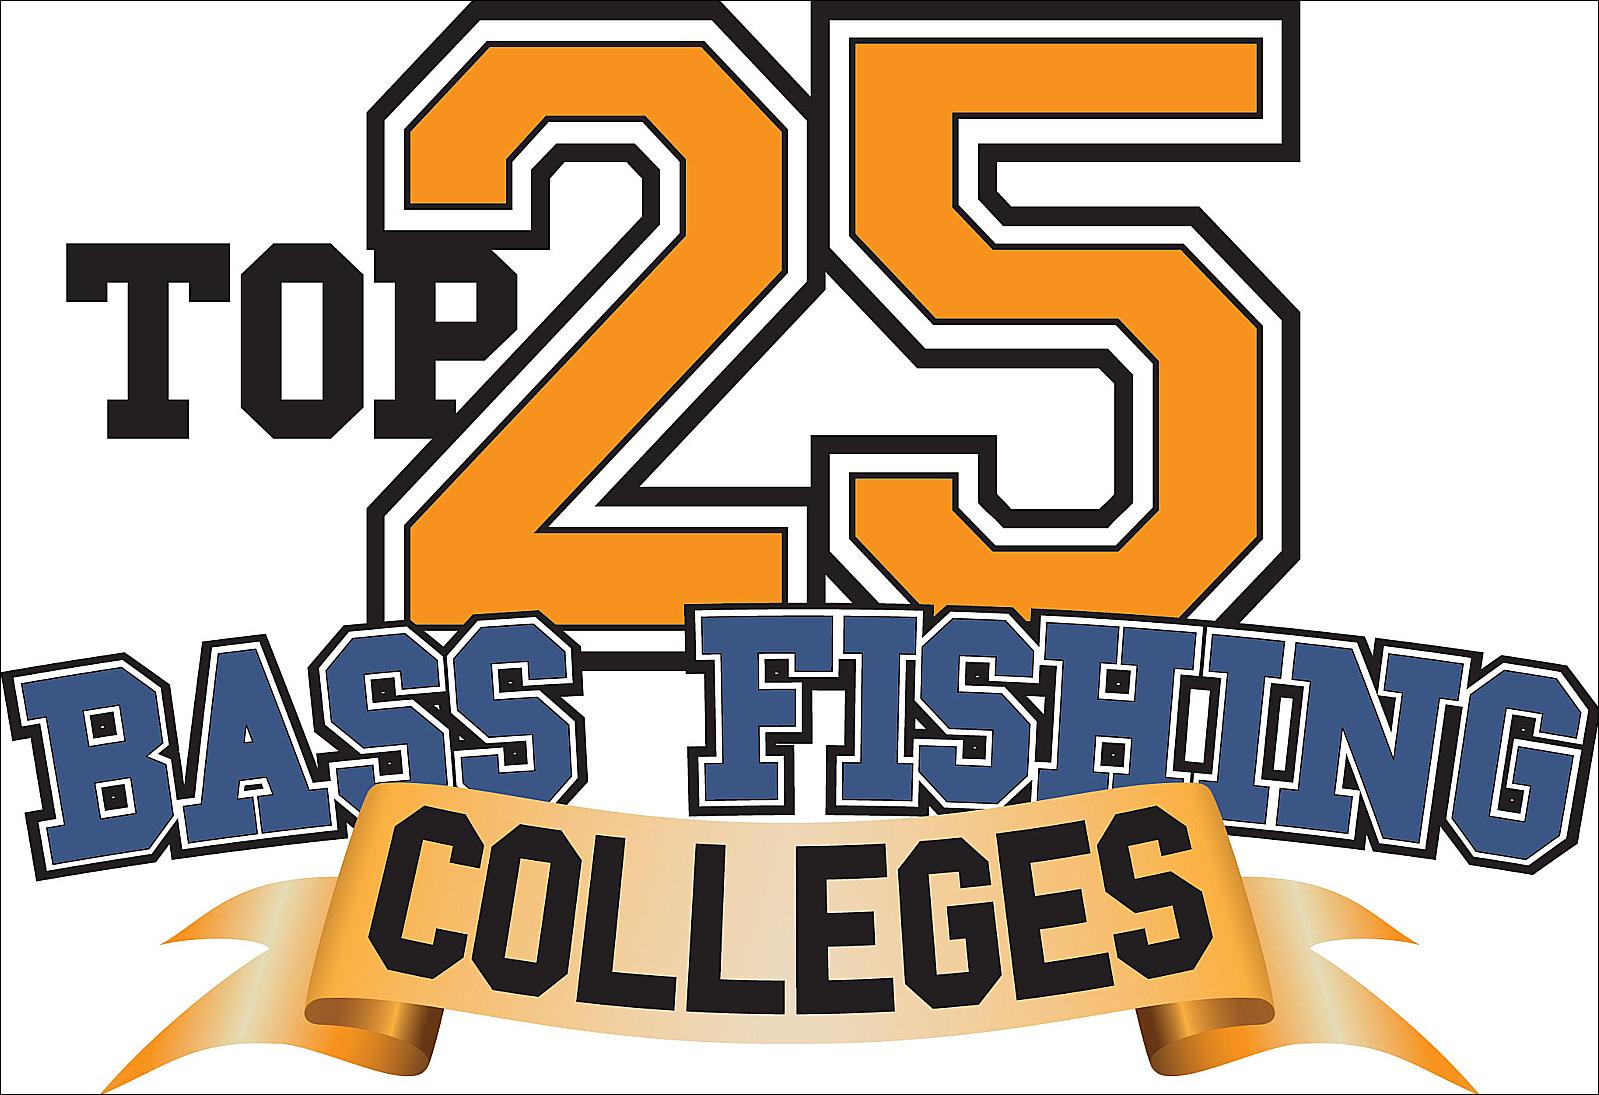 Top 25 bass fishing colleges - Major League Fishing